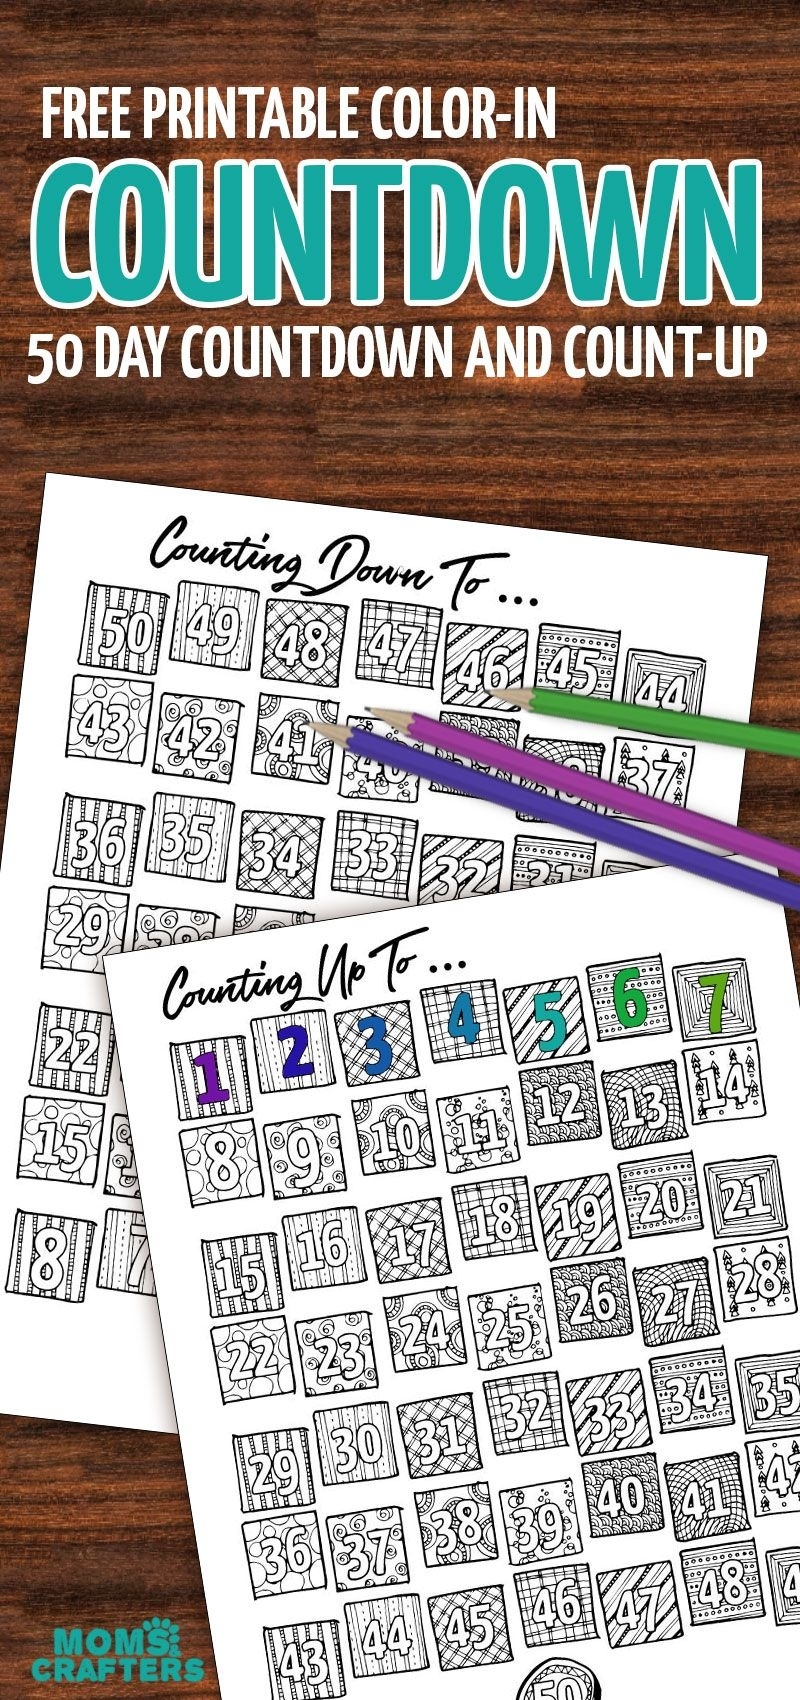 Grab This Fun Color-In Countdown And Progress Tracker Print Off 100 Day Tear Off Calendar